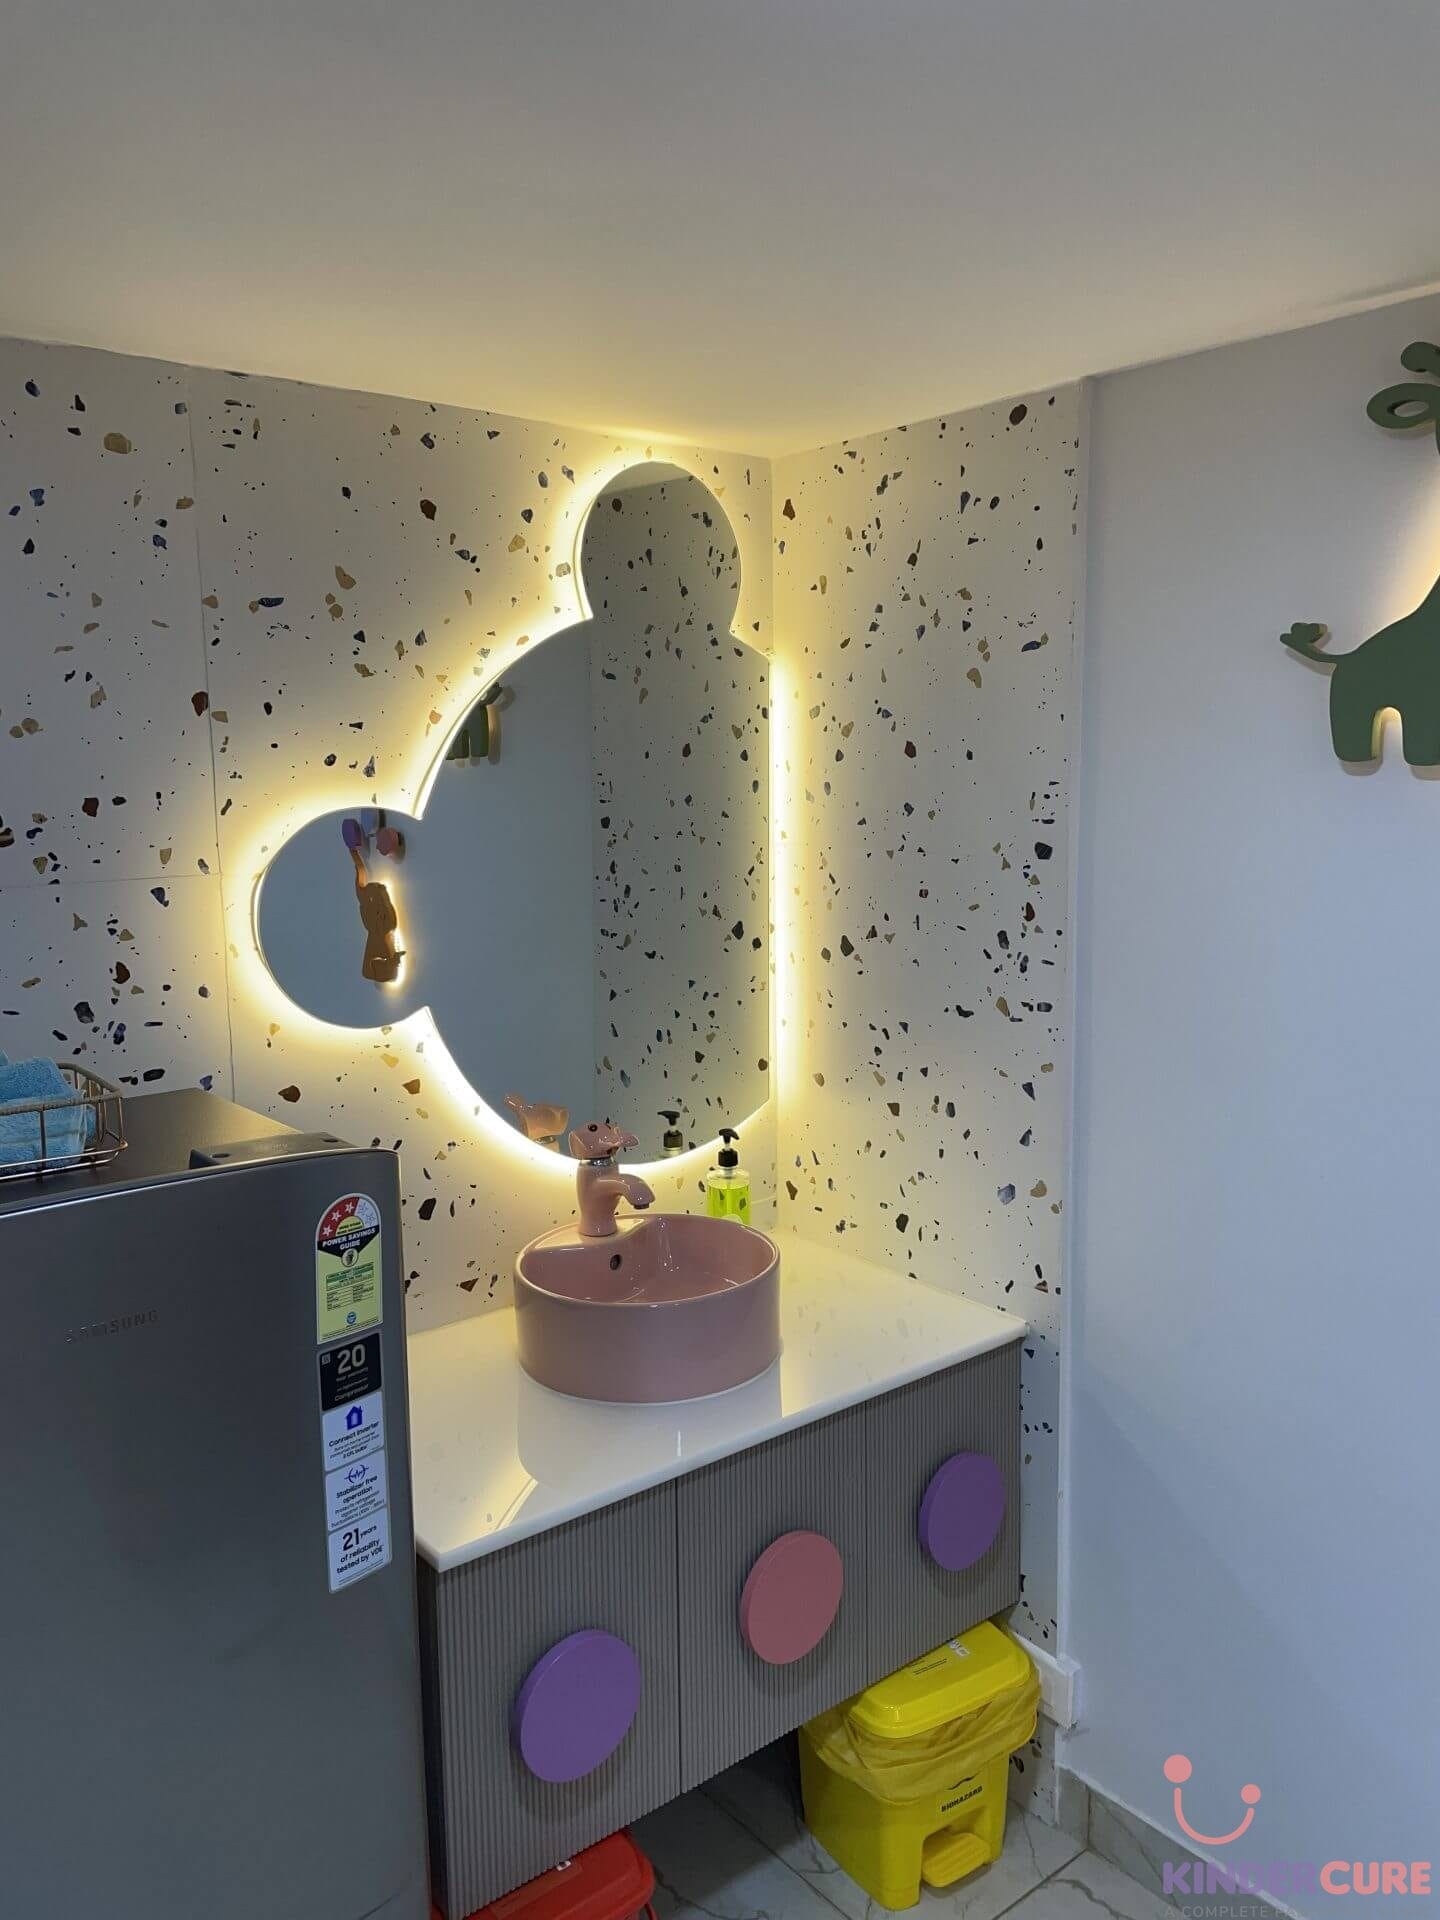 Child-friendly wash basin area with a terrazzo wall, backlit Mickey Mouse mirror, and bunny-shaped tap in KinderCure's consultation room, Gurgaon